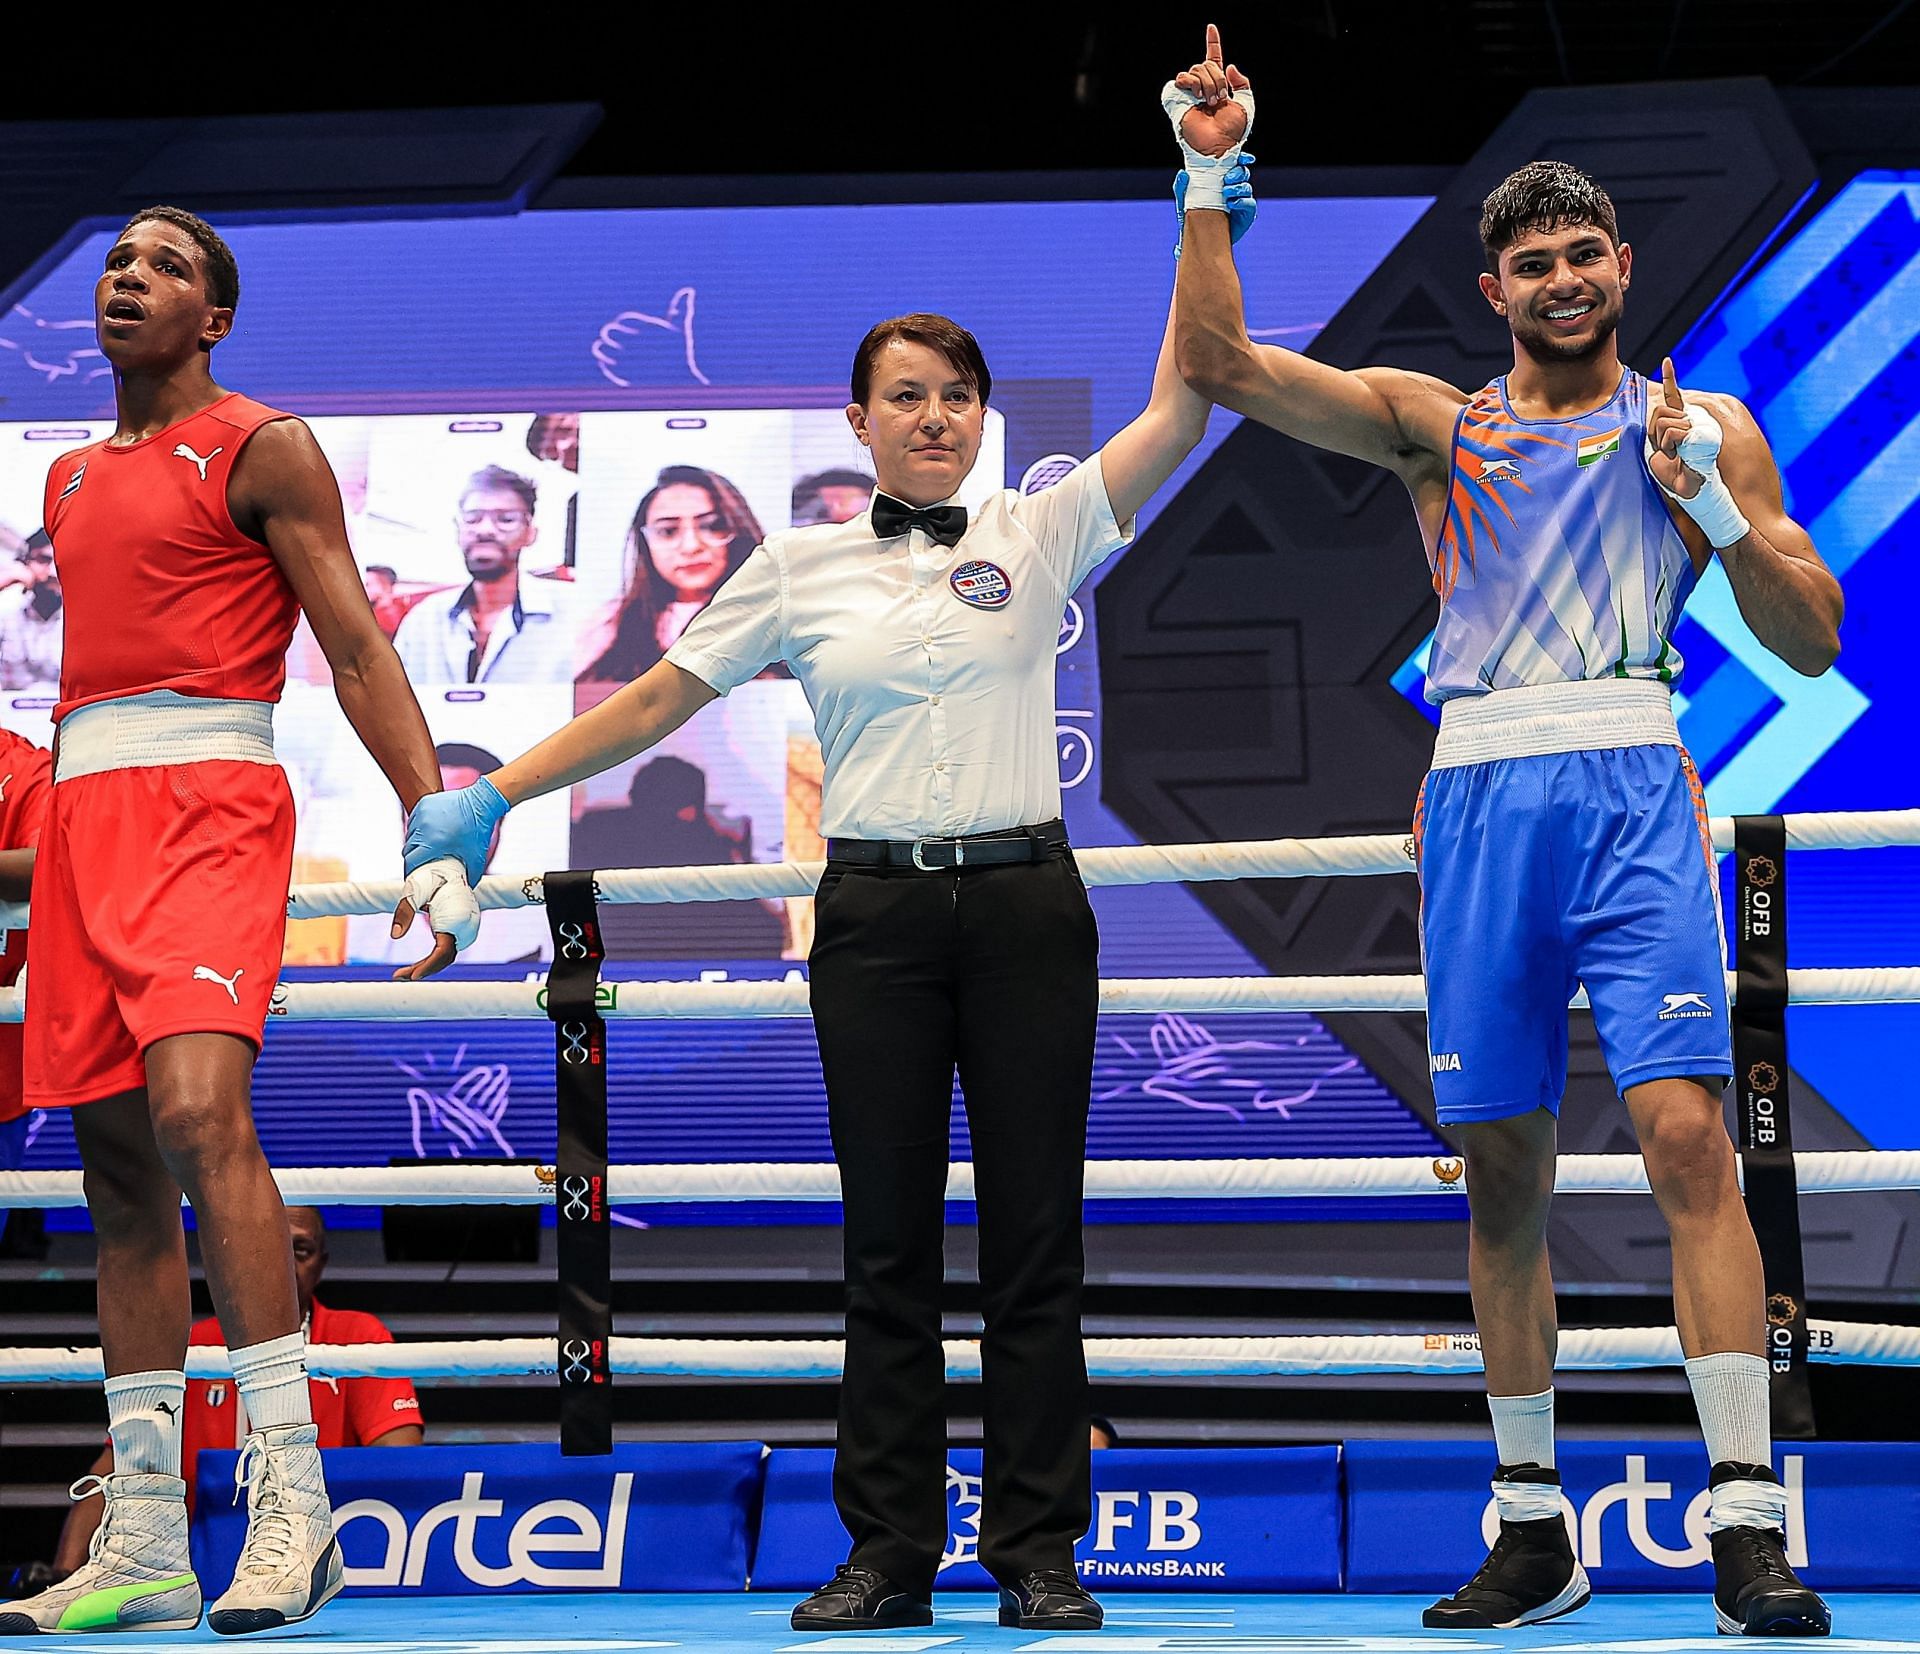 32 nations entered quarter-finals of the IBA Men's World Boxing